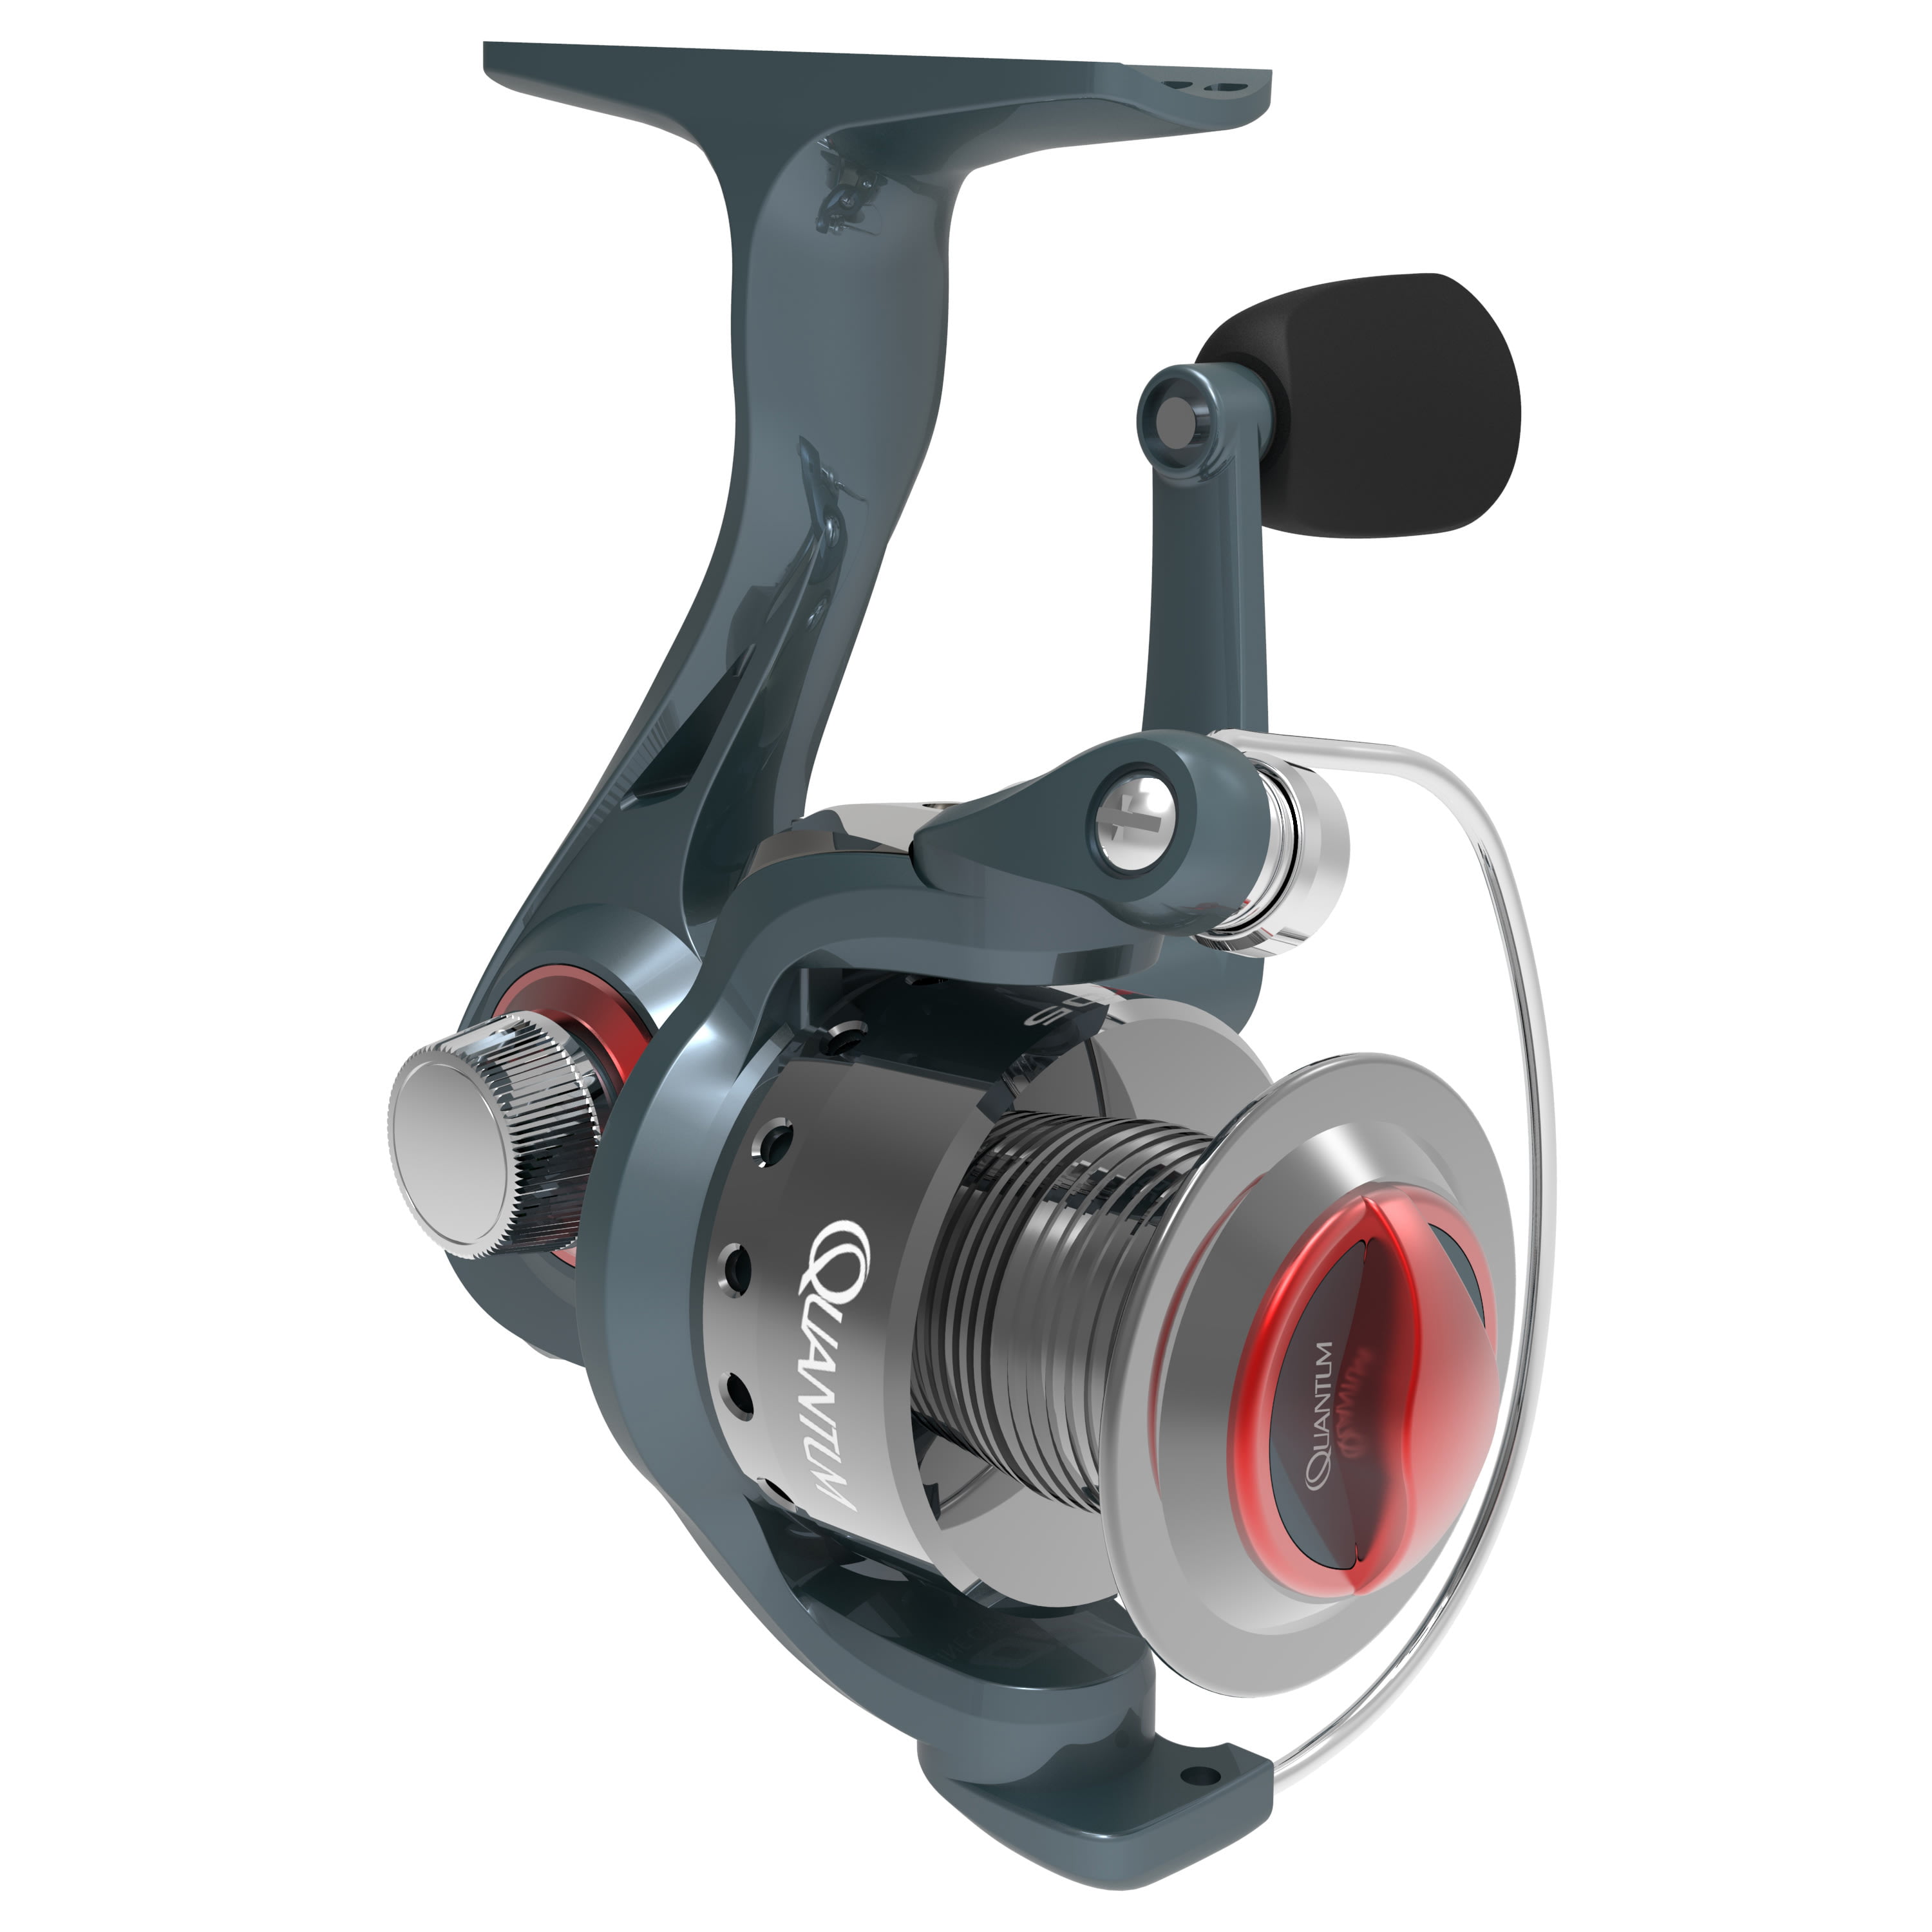 Quantum Teton Trout 10 Ultra-Light Spinning Reel RECONDITIONED